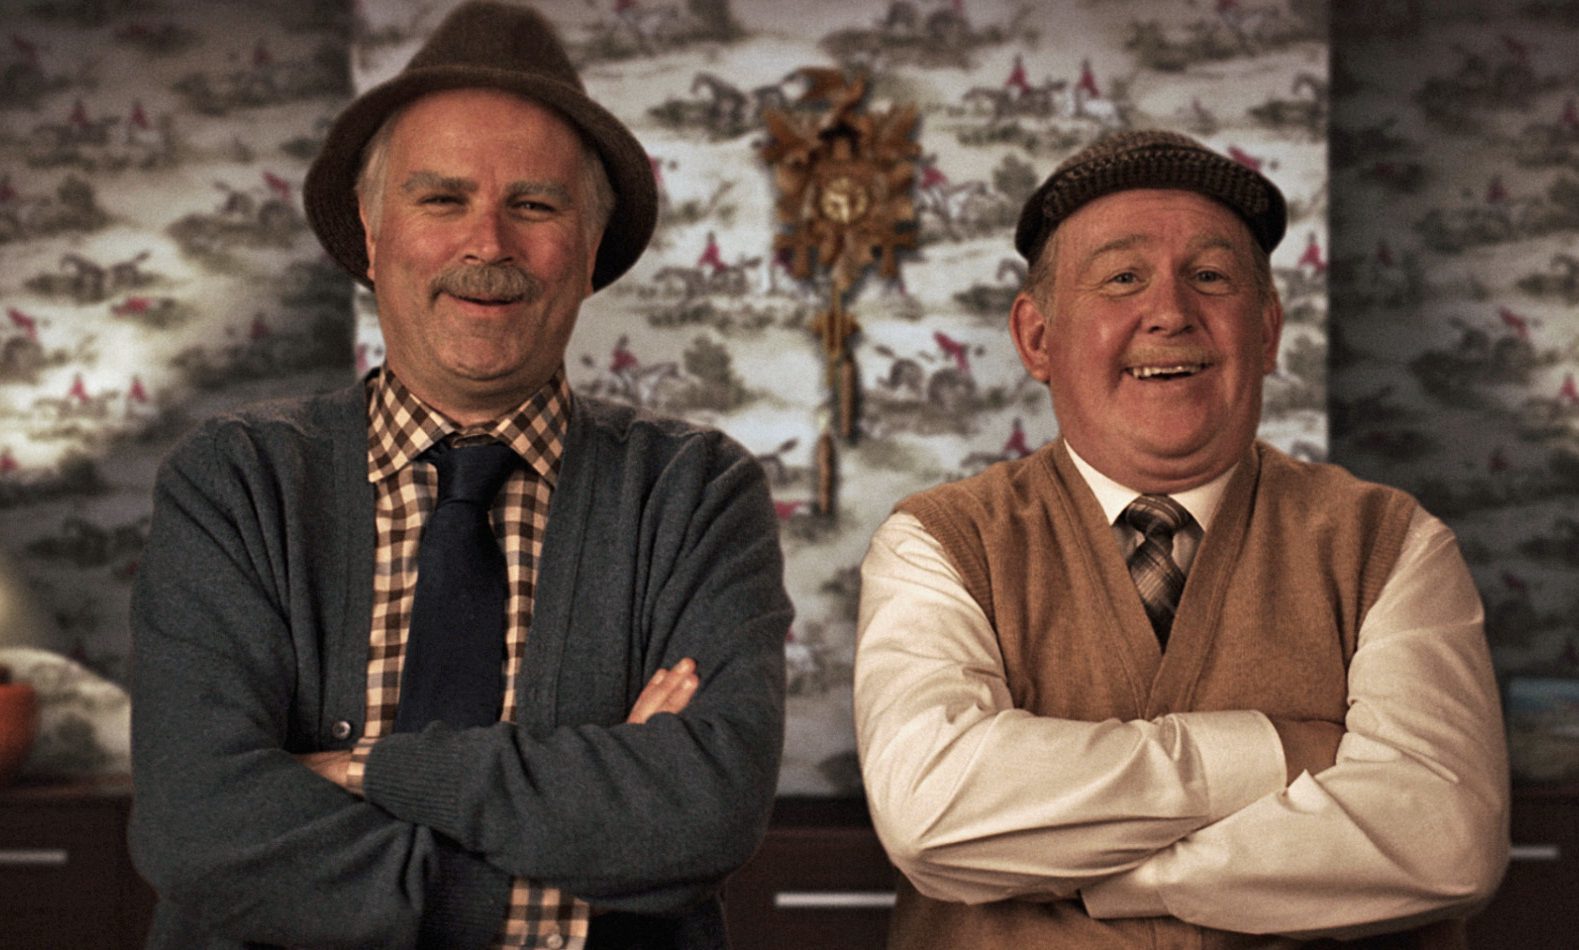 Victor McDade, played by Greg Hemphill, and Jack Jarvis, played by Ford Kiernan in Still Game